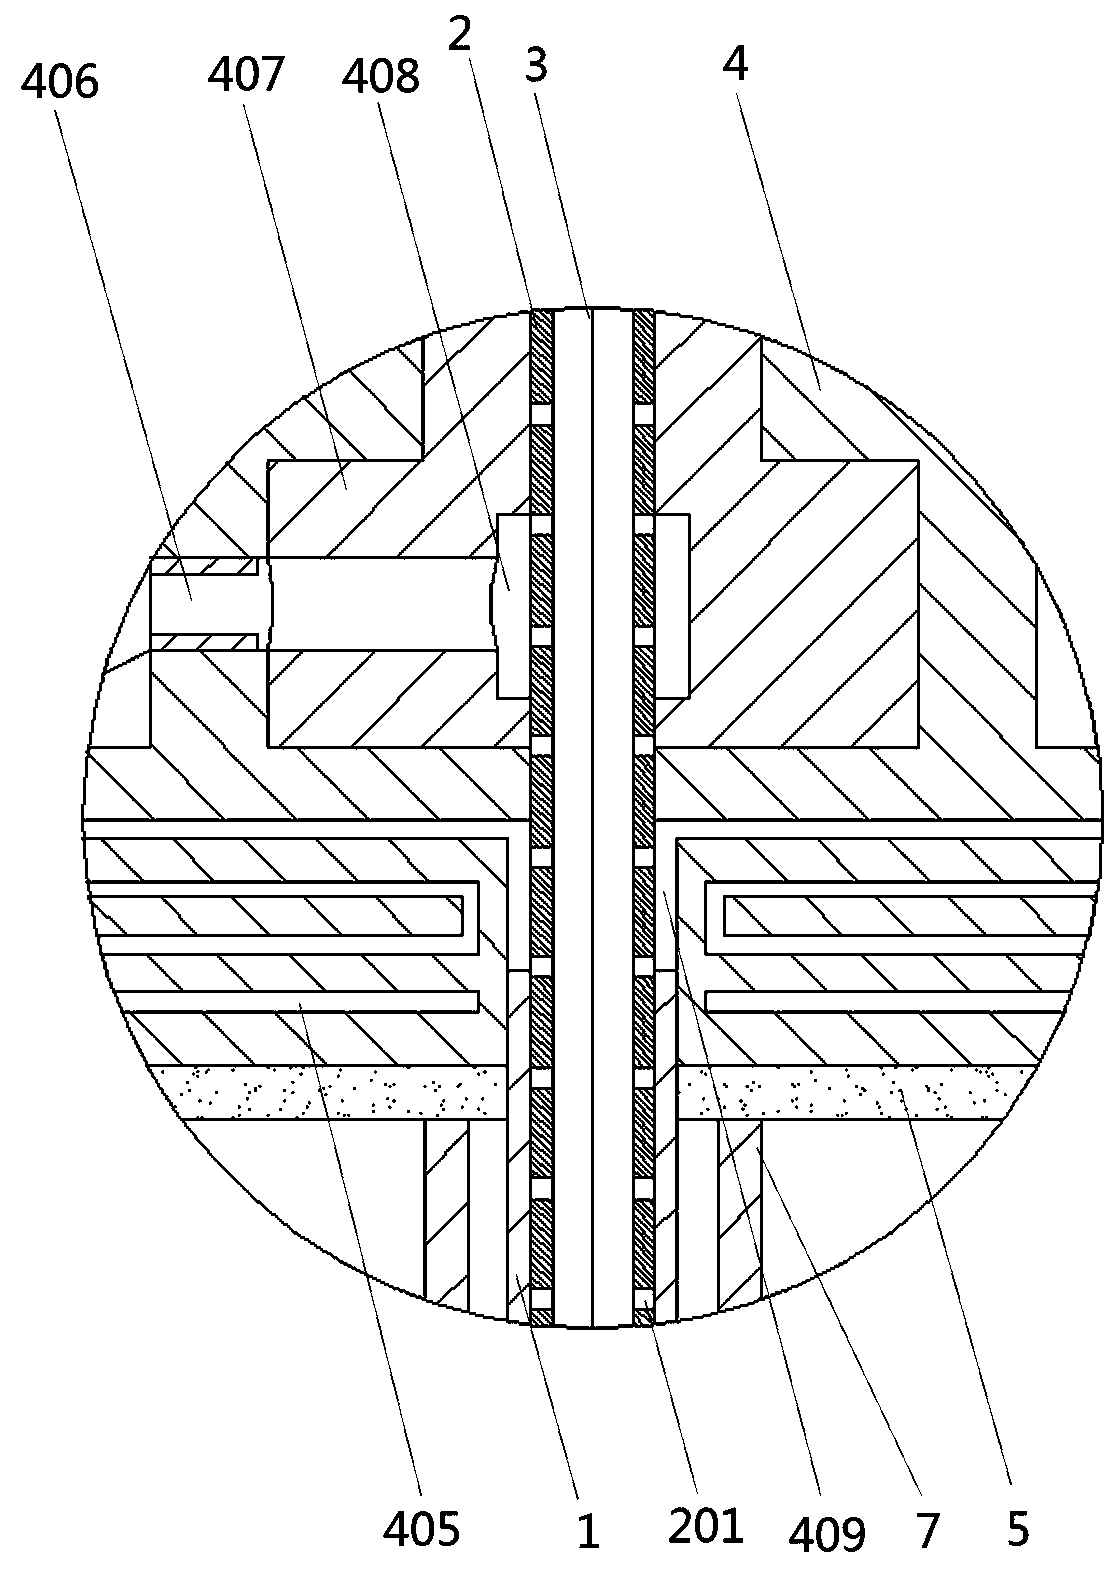 Lumbar vertebral puncture needle assembly with positioning and color rendering functions